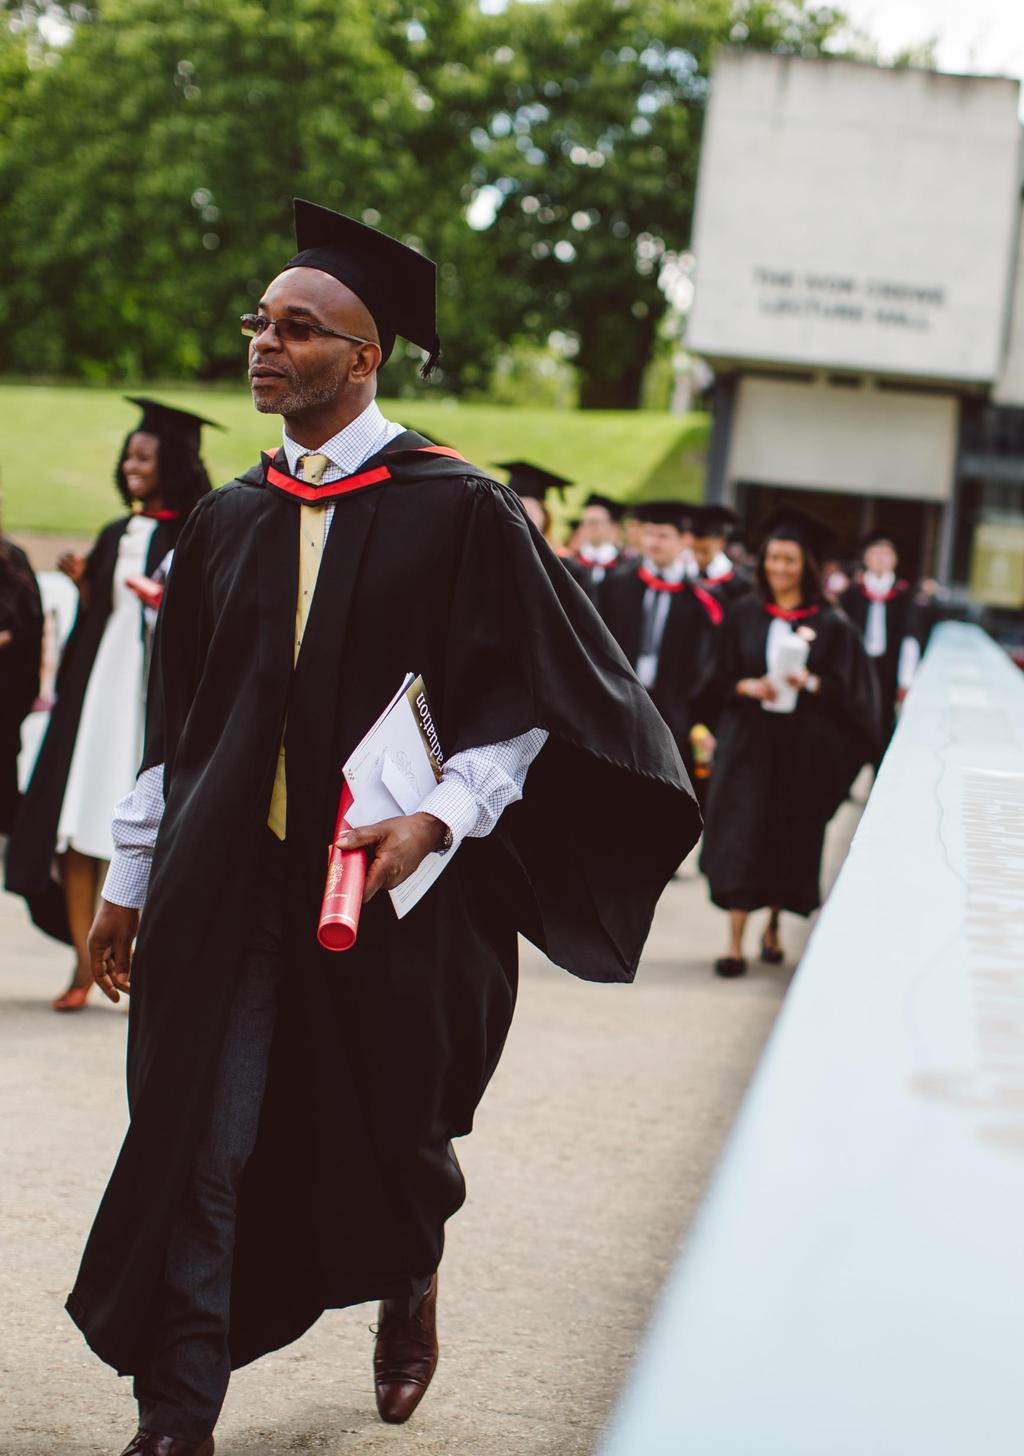 OUR STUDENTS 19 Graduates from around the world travel to Colchester to attend their ceremony and receive their University of Essex degree certificate.